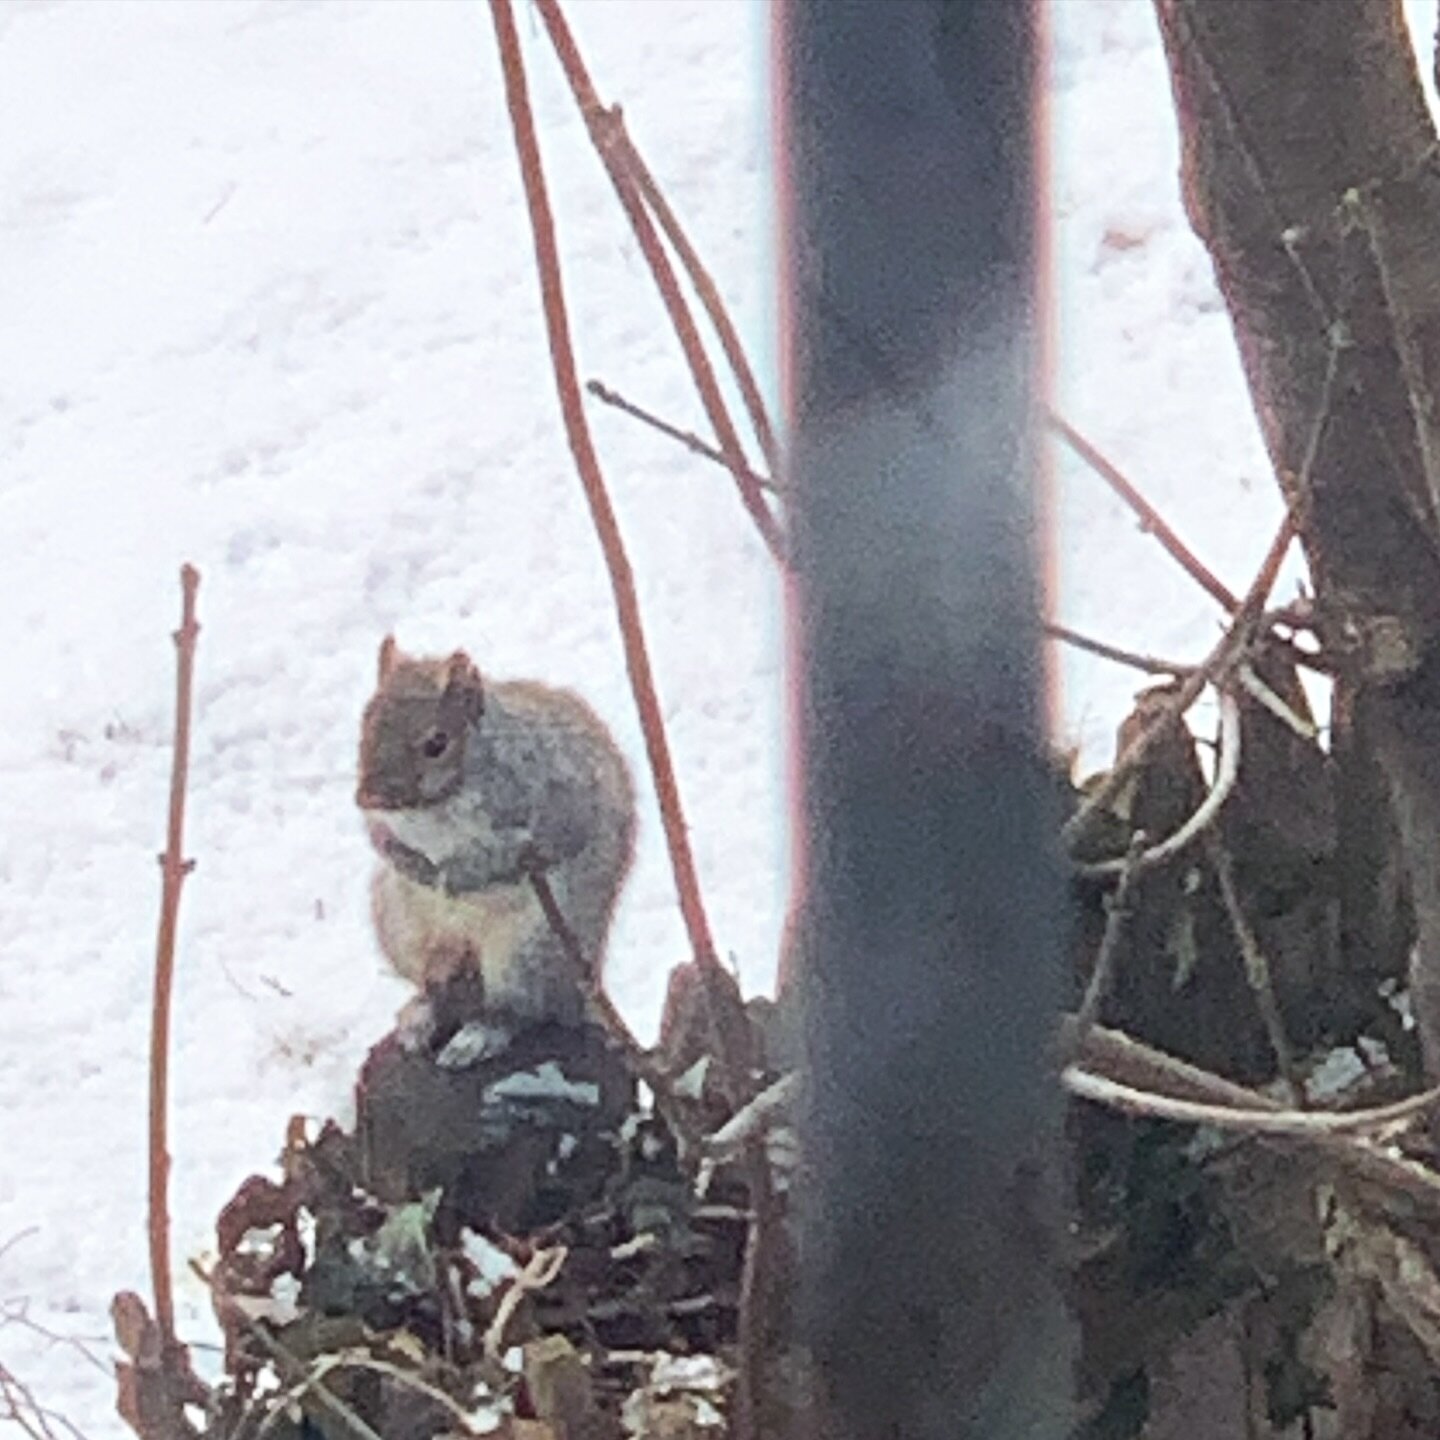 I often complain that I hate squirrels. Rats with tails. But this morning I spied this cute little nuggin chilling on a branch outside my window. And even though he/she looks like a cross between a somewhat grumpy old person and a pig (zoom in and te